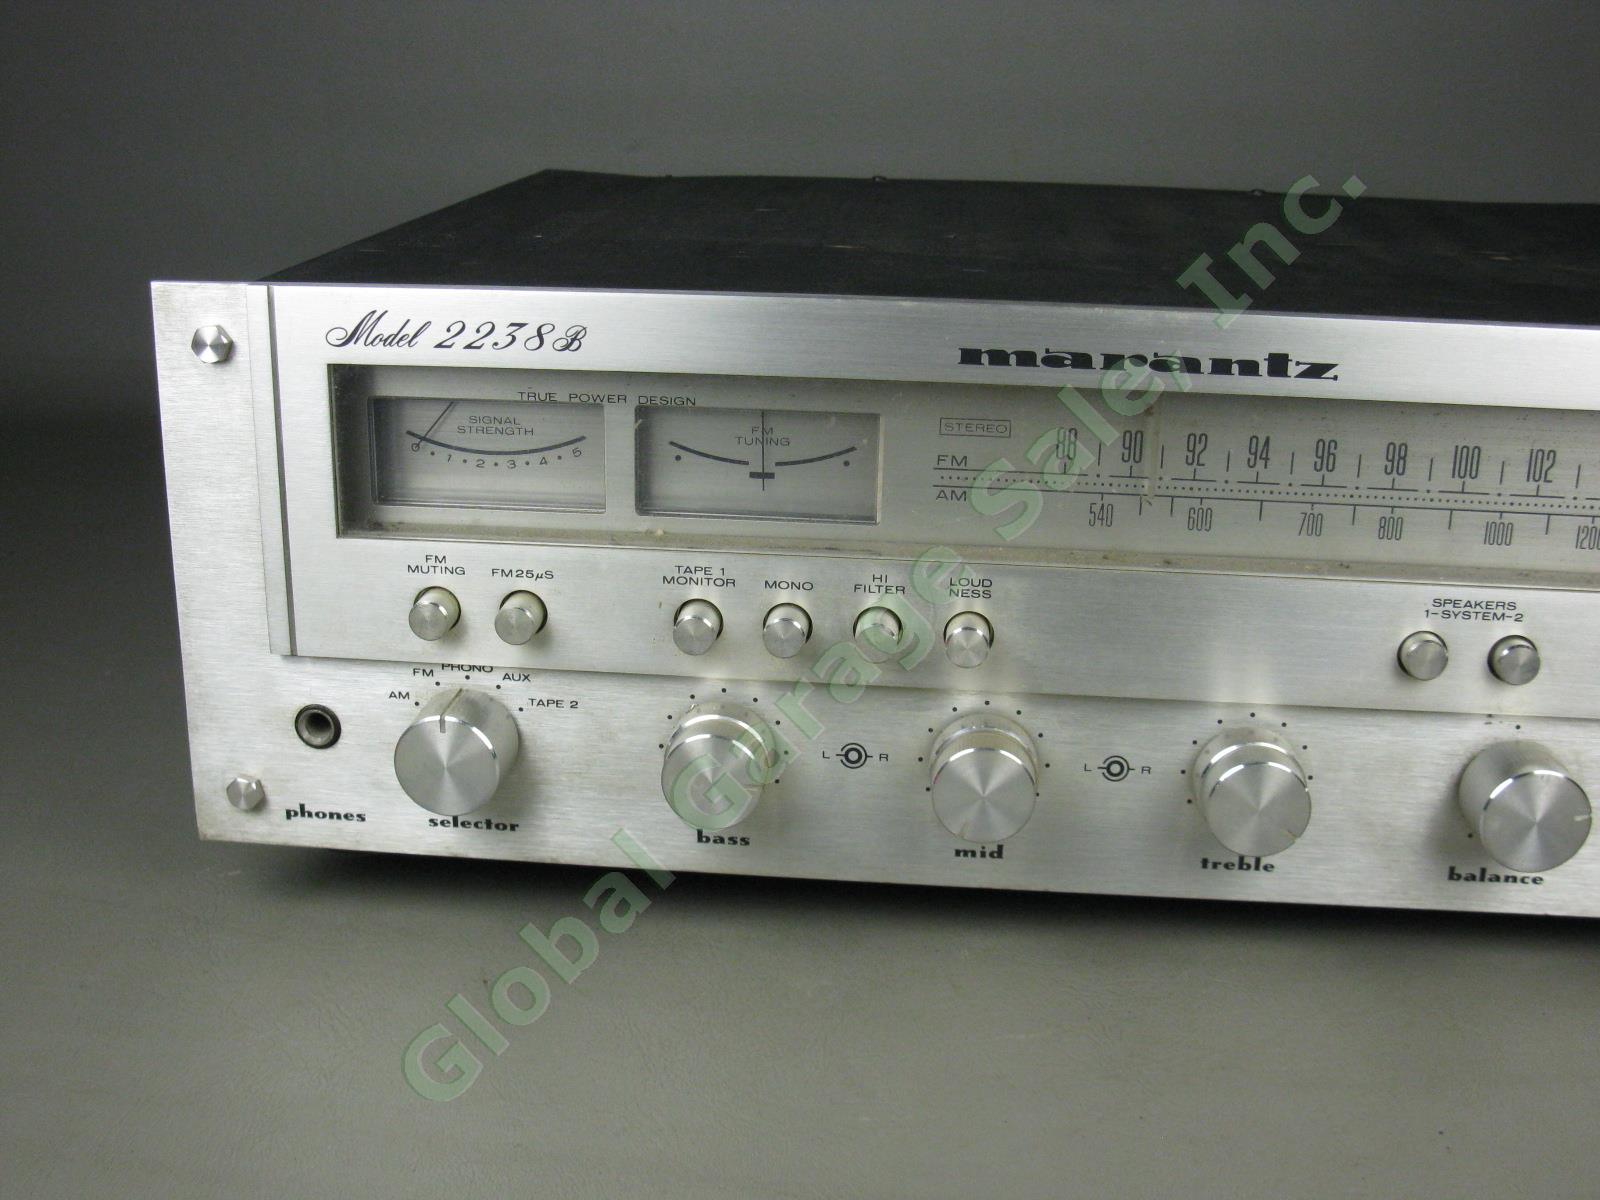 Vtg Marantz 2238B Stereophonic AM/FM Stereo Receiver Integrated Amplifier Preamp 1